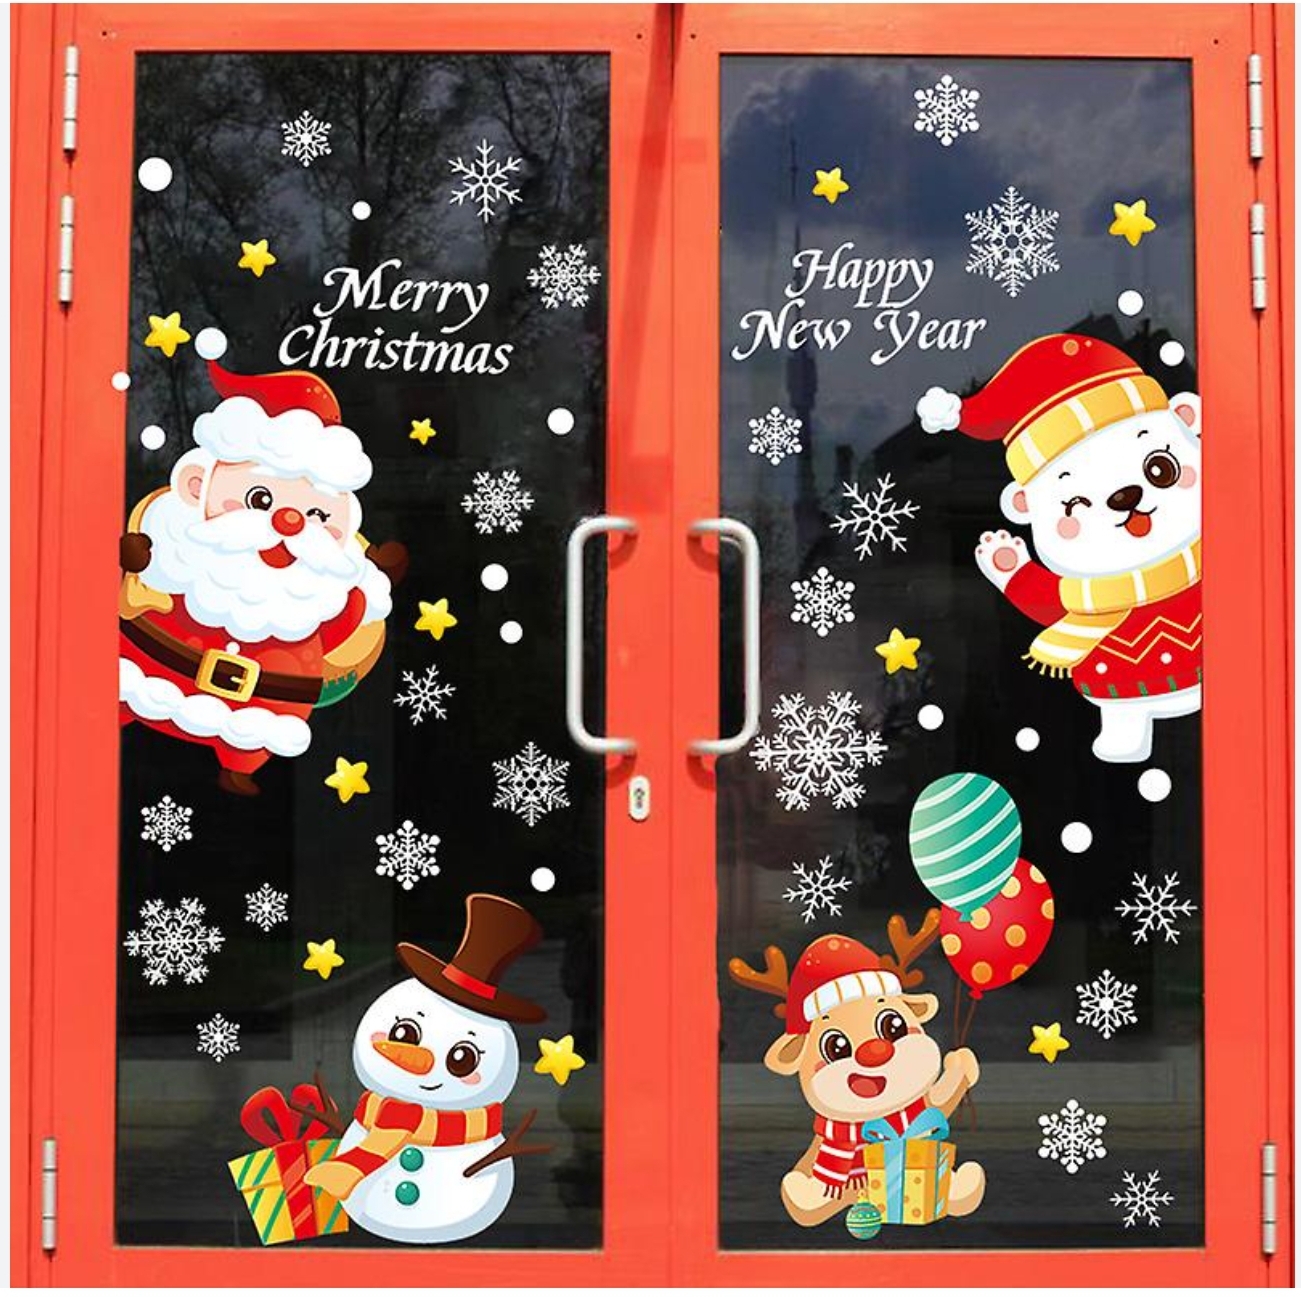 Christmas Holiday Snowflakes, Santa Claus, Reindeer, and more. Decals for Home/Business Decor on Any Smooth Surface. (P4)